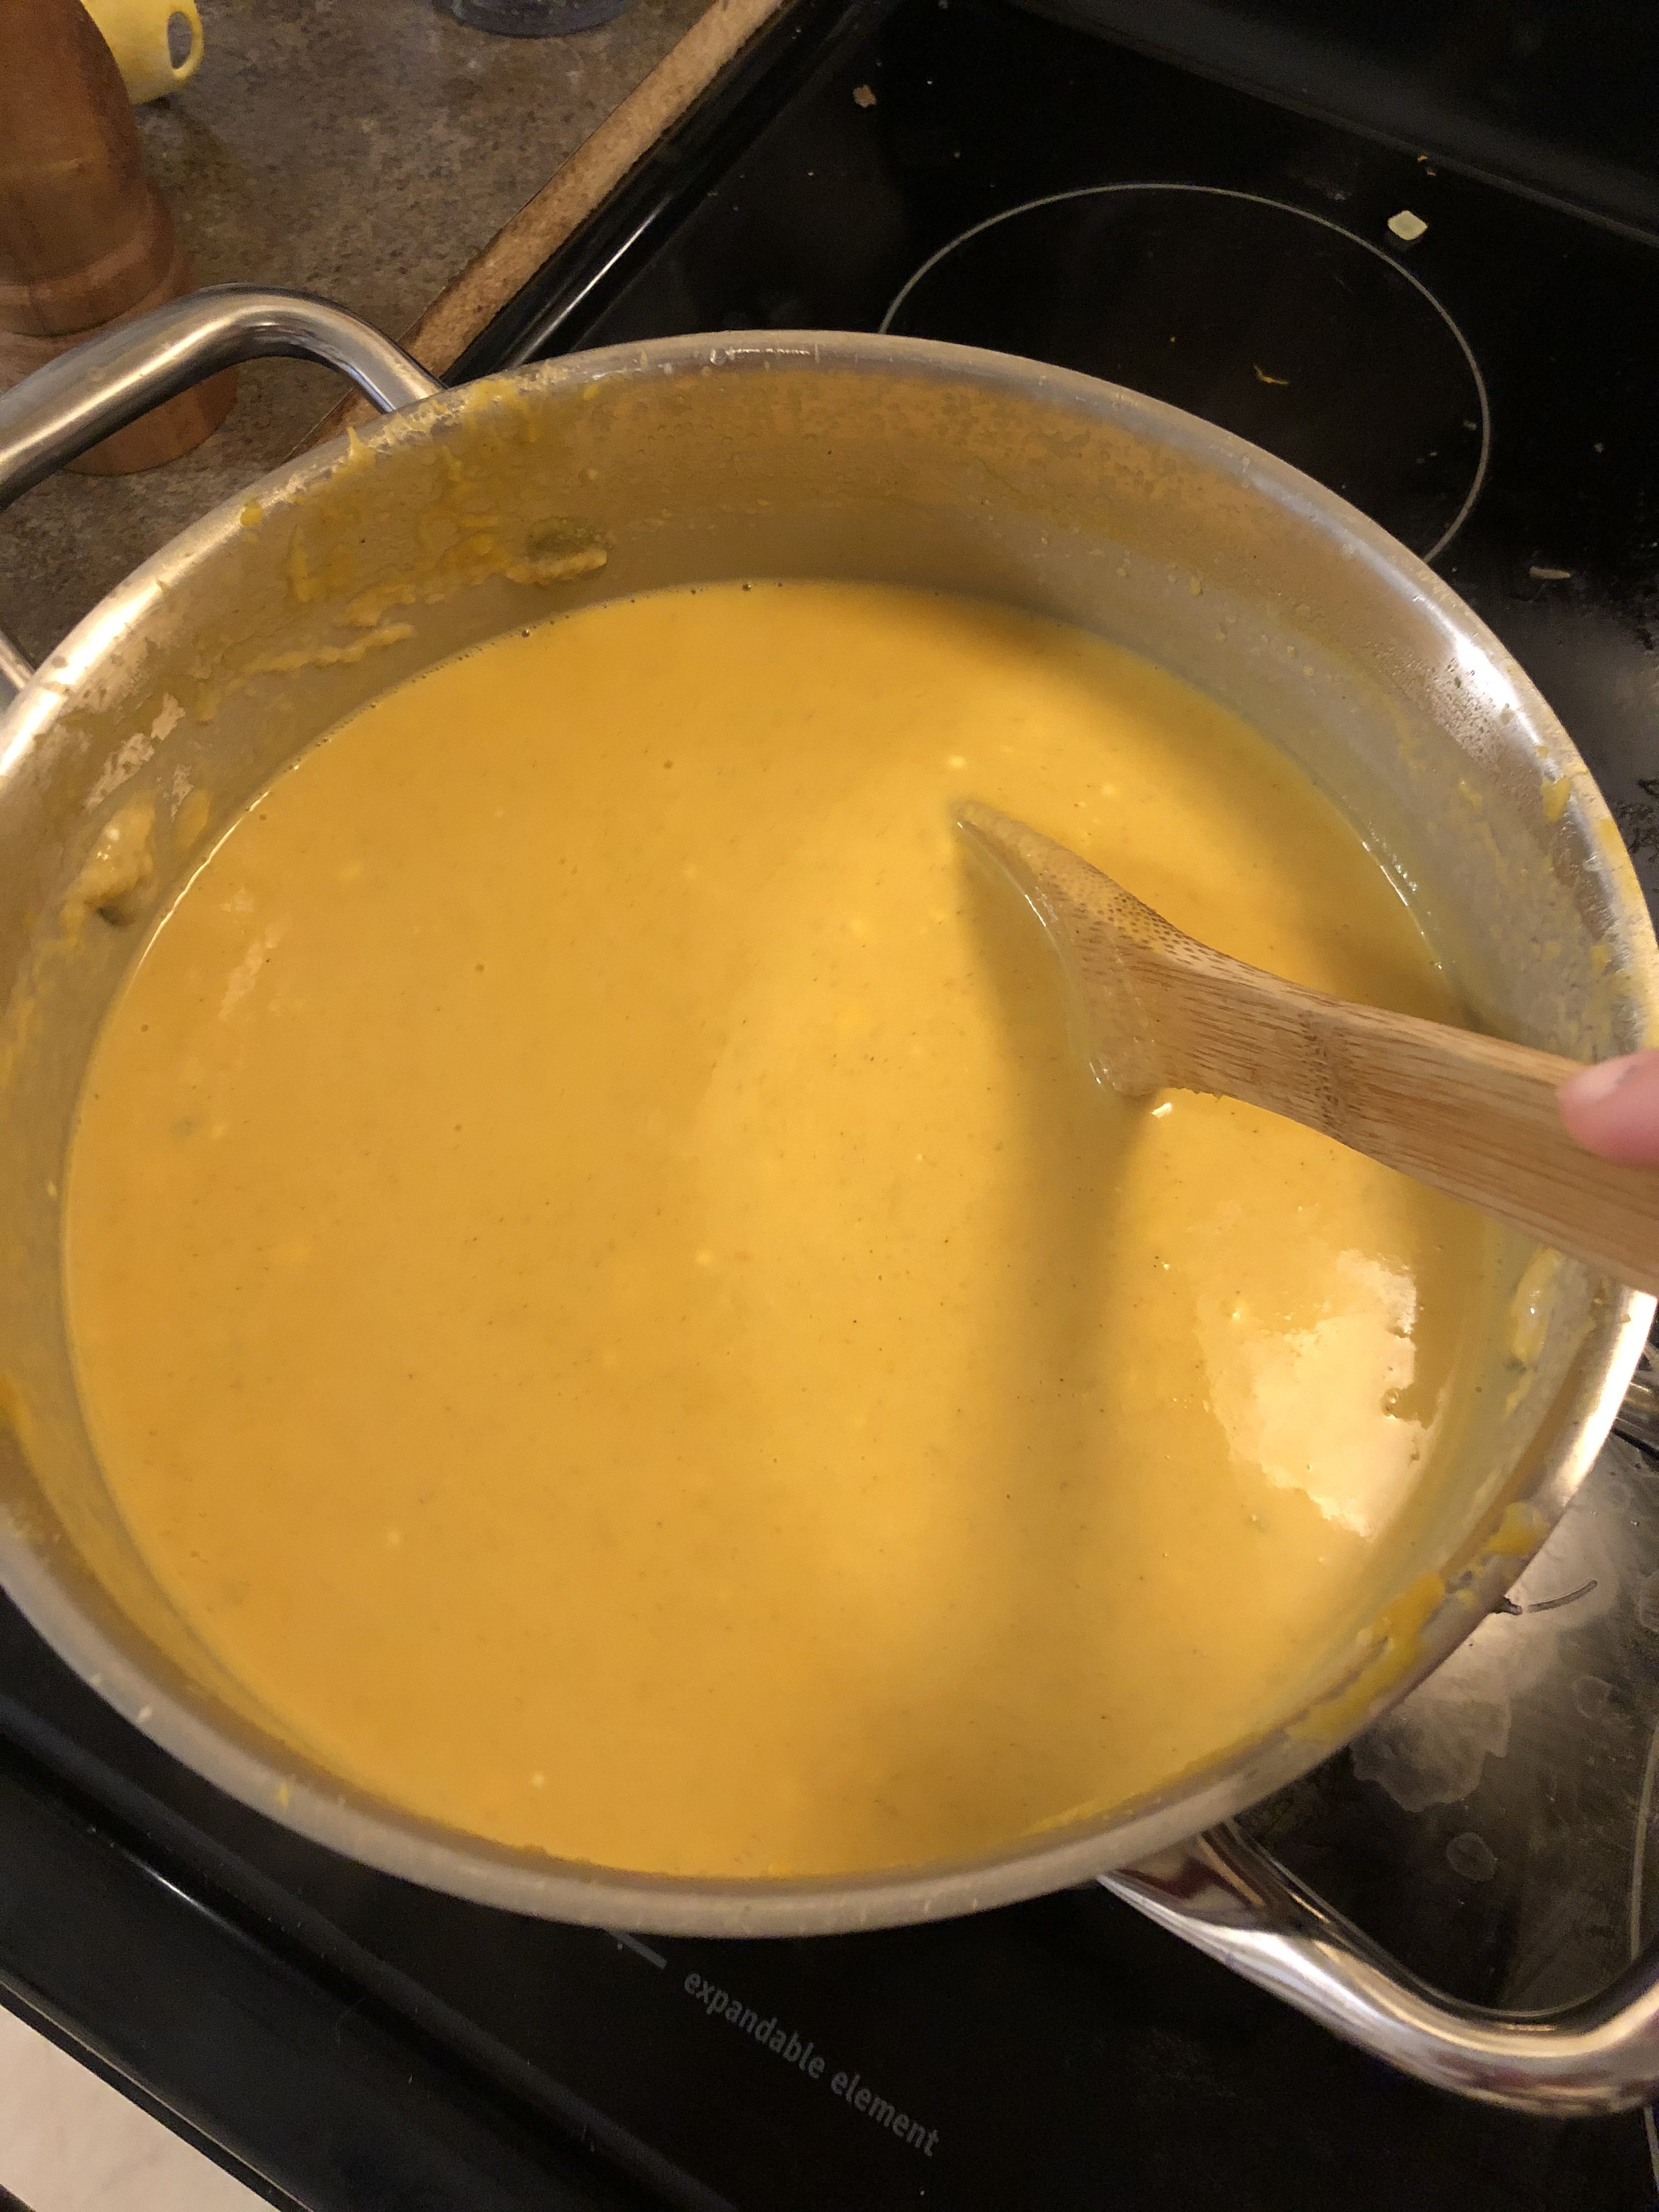 https://www.zeldadungeon.net/i-made-yetos-pumpkin-soup-from-twilight-princess-heres-how-it-tasted/img_3166/